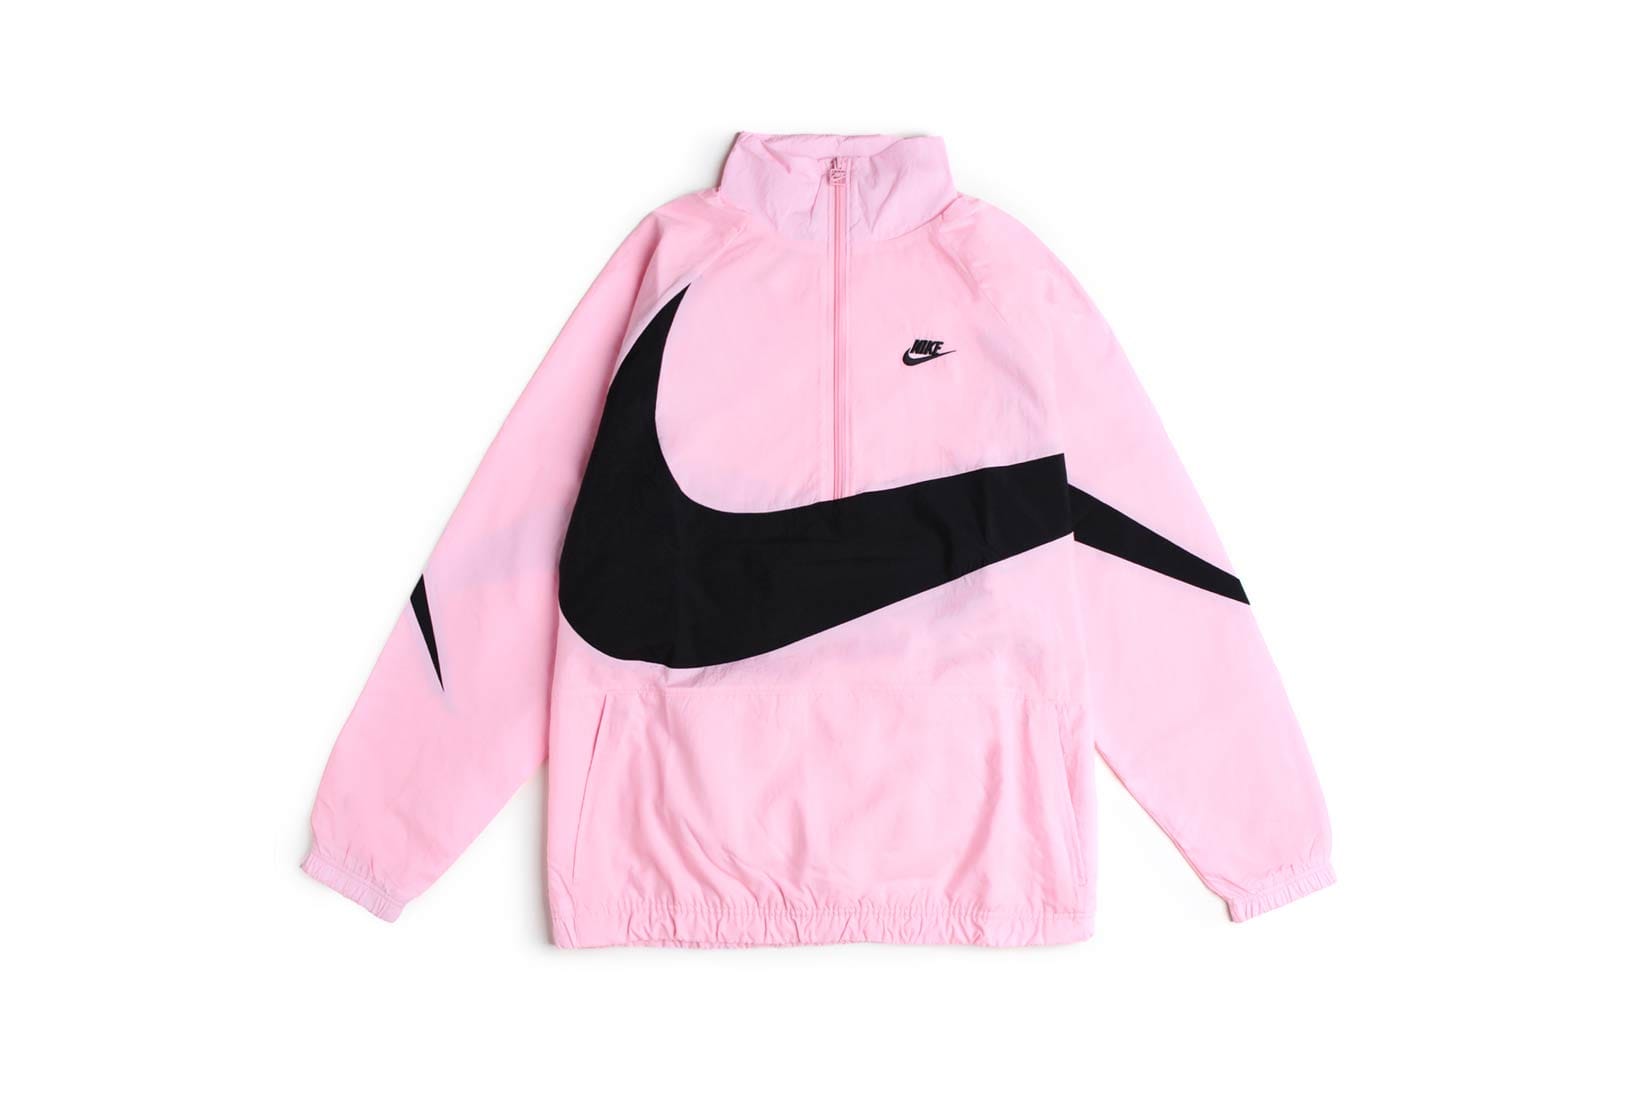 Swoosh Jacket and Pants in Pink 